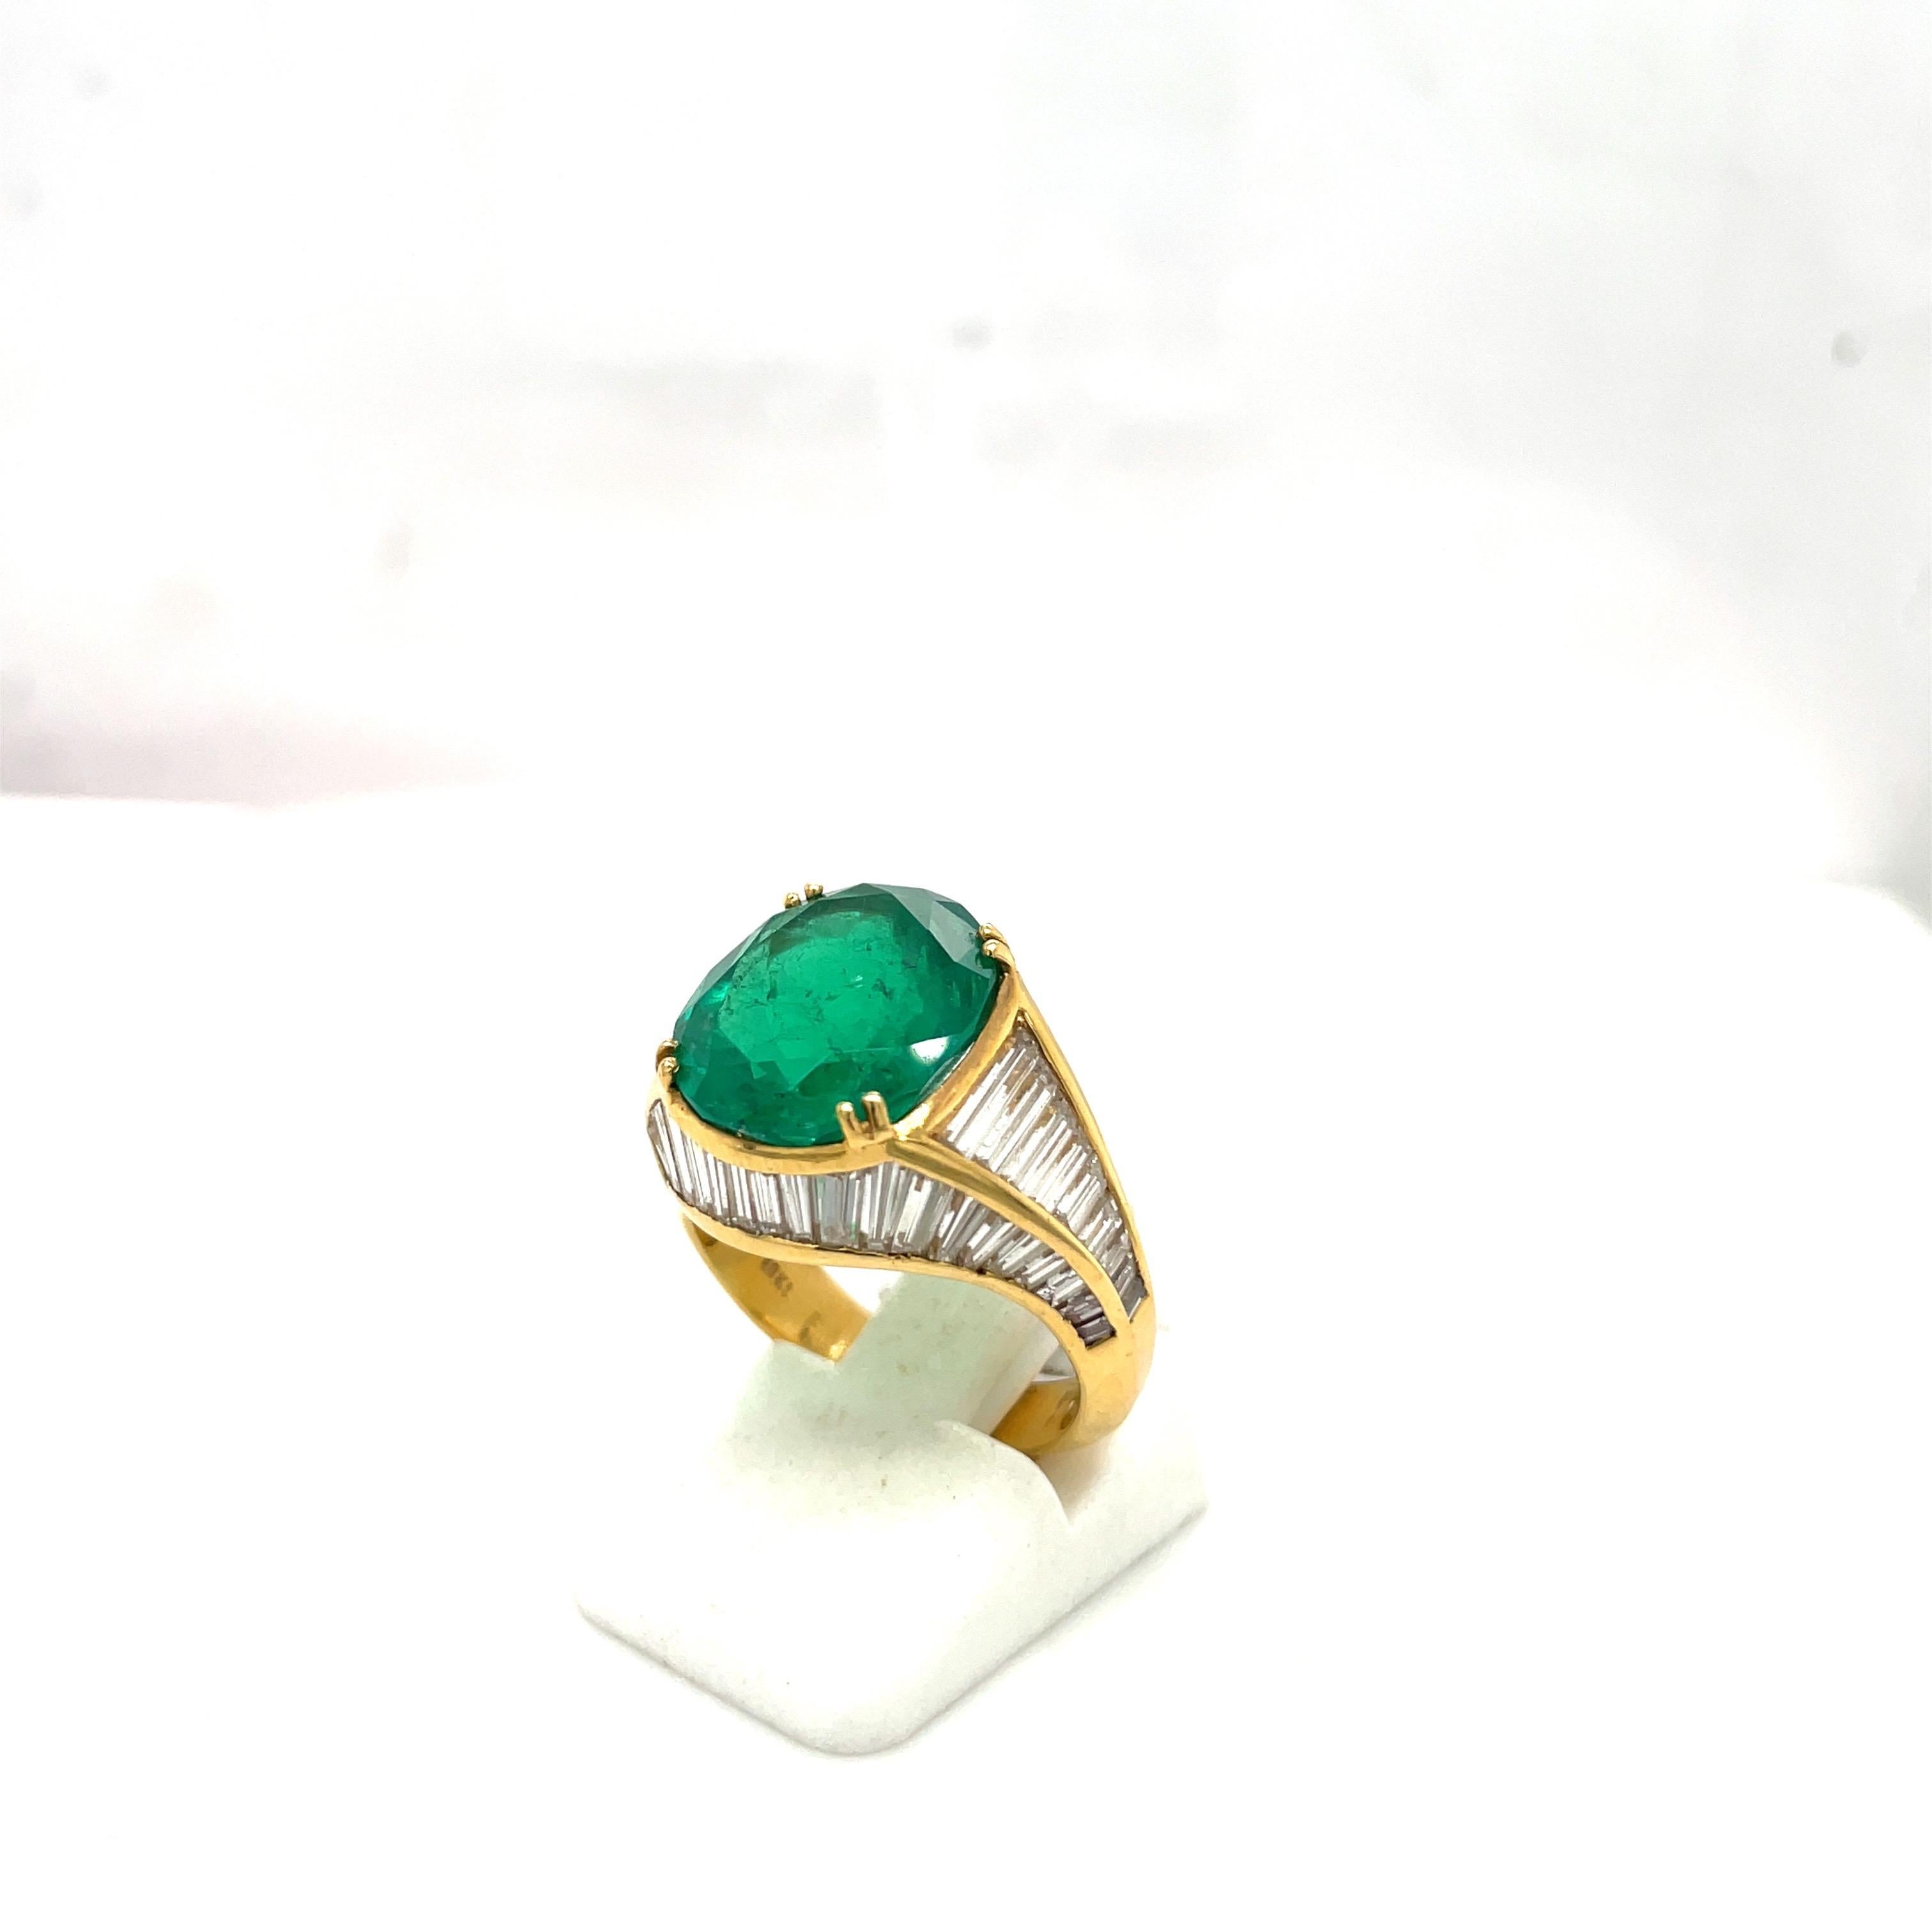 This magnificent 18 karat yellow gold ring features a gorgeous oval emerald weighing 6.00 carats.The unique throne like setting is set with 3.23 carats of baguette cut diamonds . The beauty of this setting is the way the baguettes are set on 4 sides